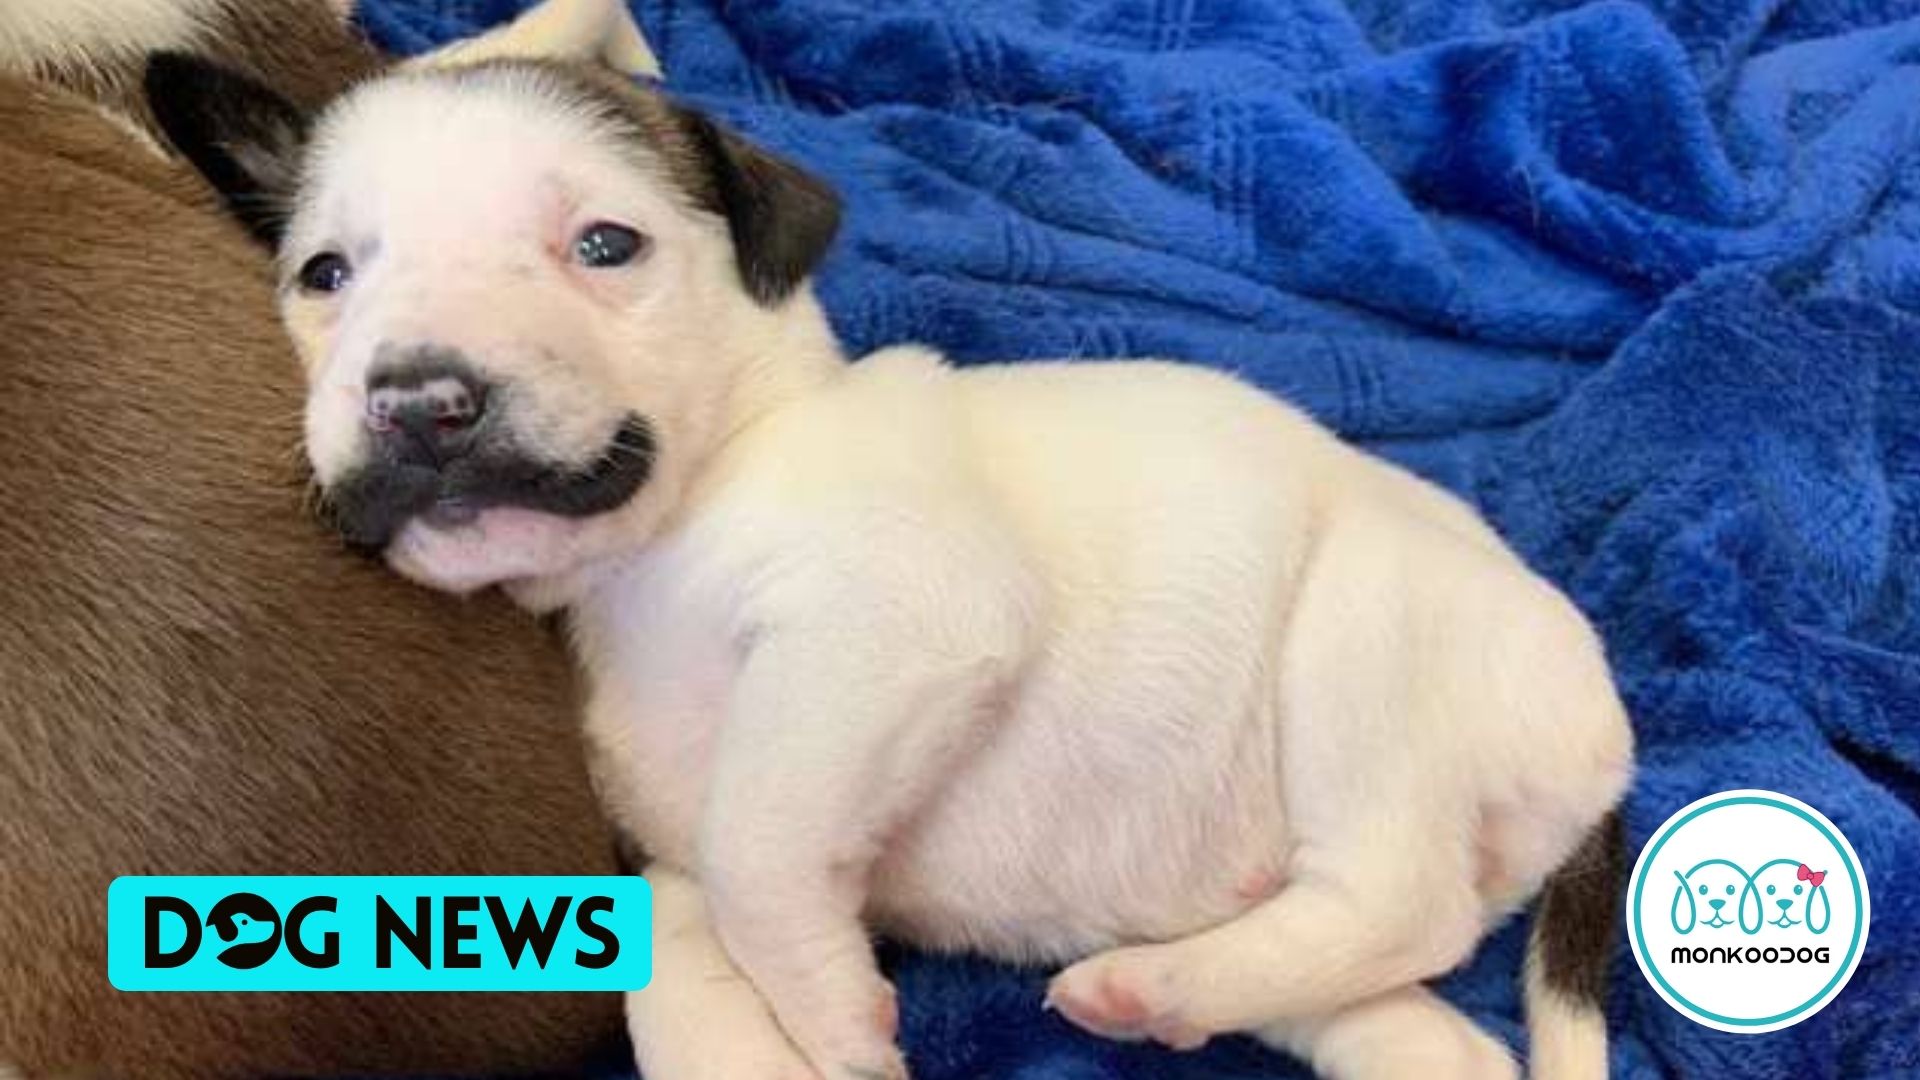 Rescue Puppy Born With The Cutest Handlebar Mustache Goes Viral On Social Media